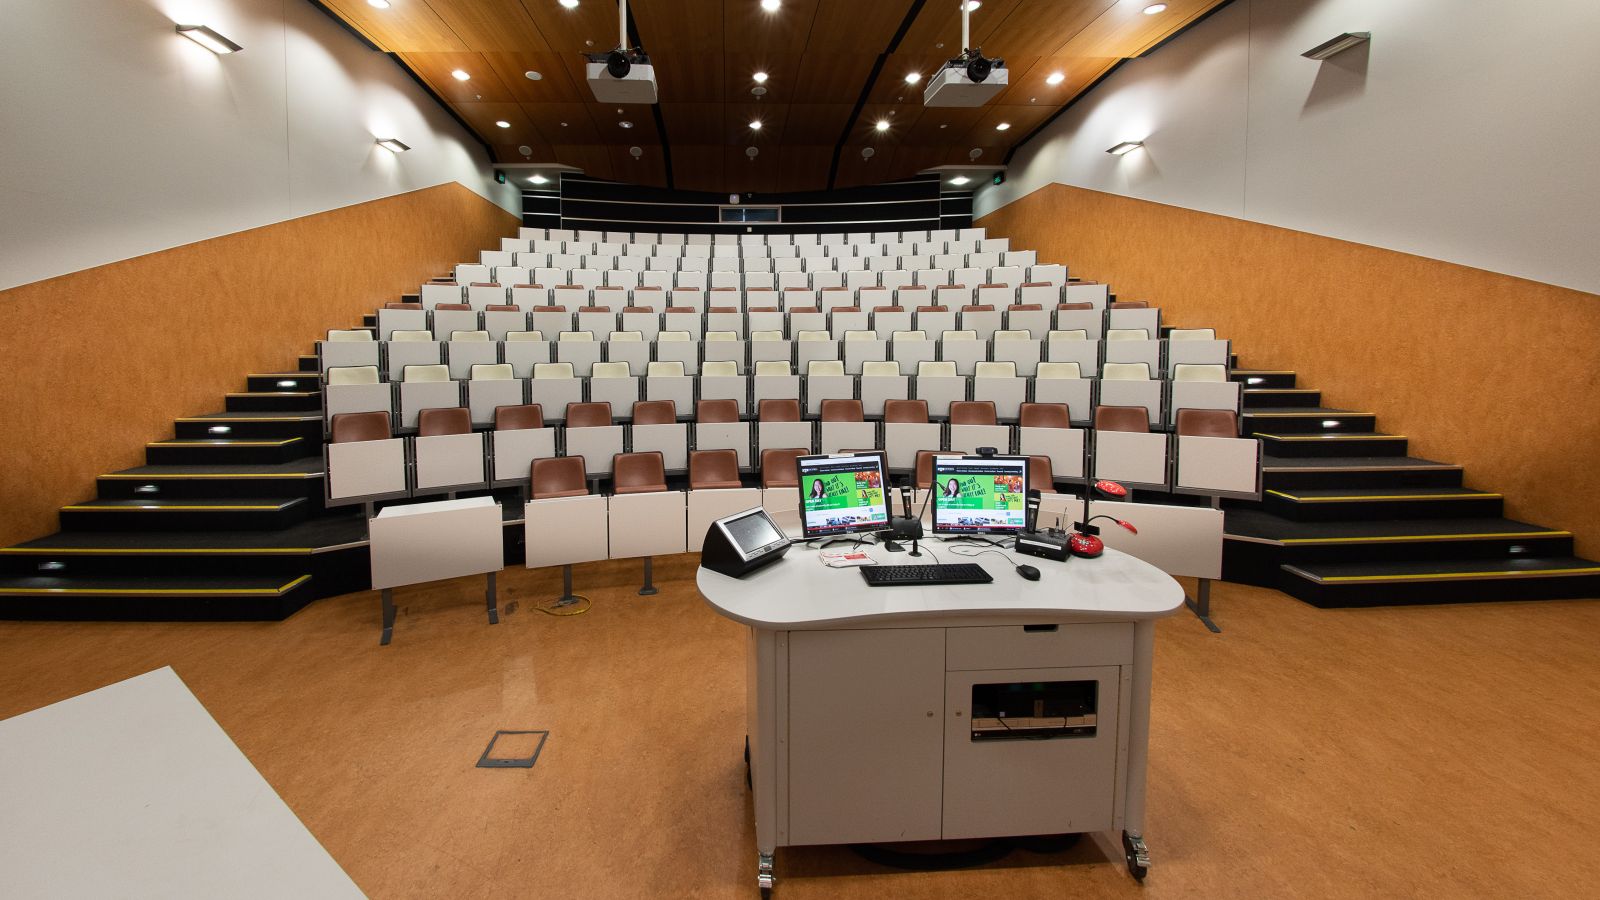 Small lecture theatre from the front, with computer screens on front lectern visible